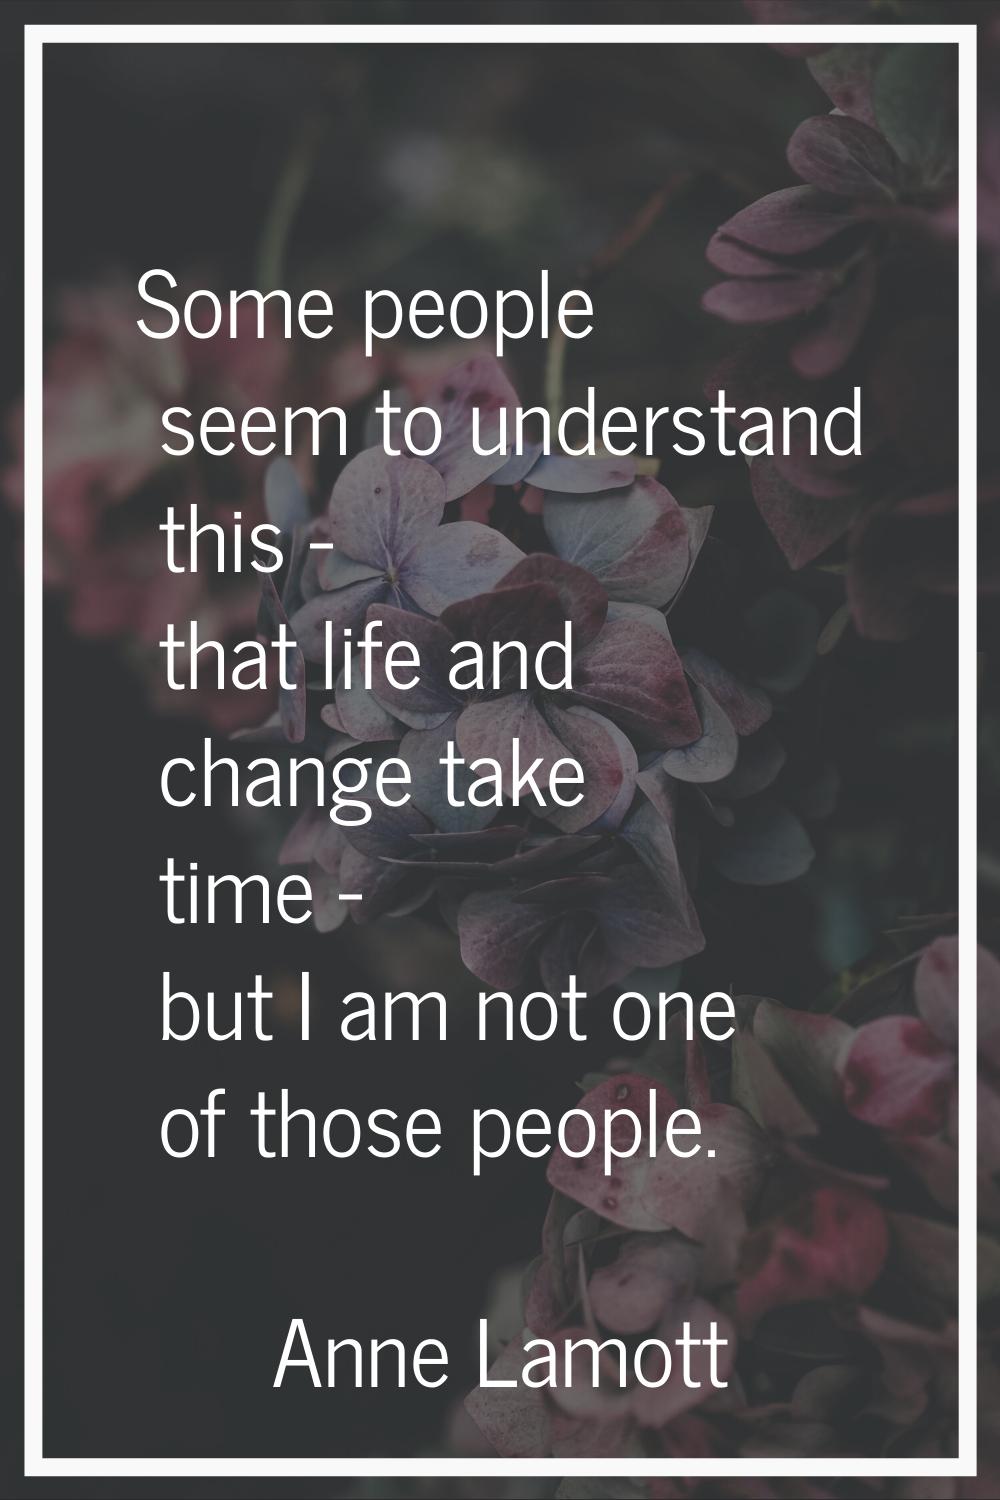 Some people seem to understand this - that life and change take time - but I am not one of those pe